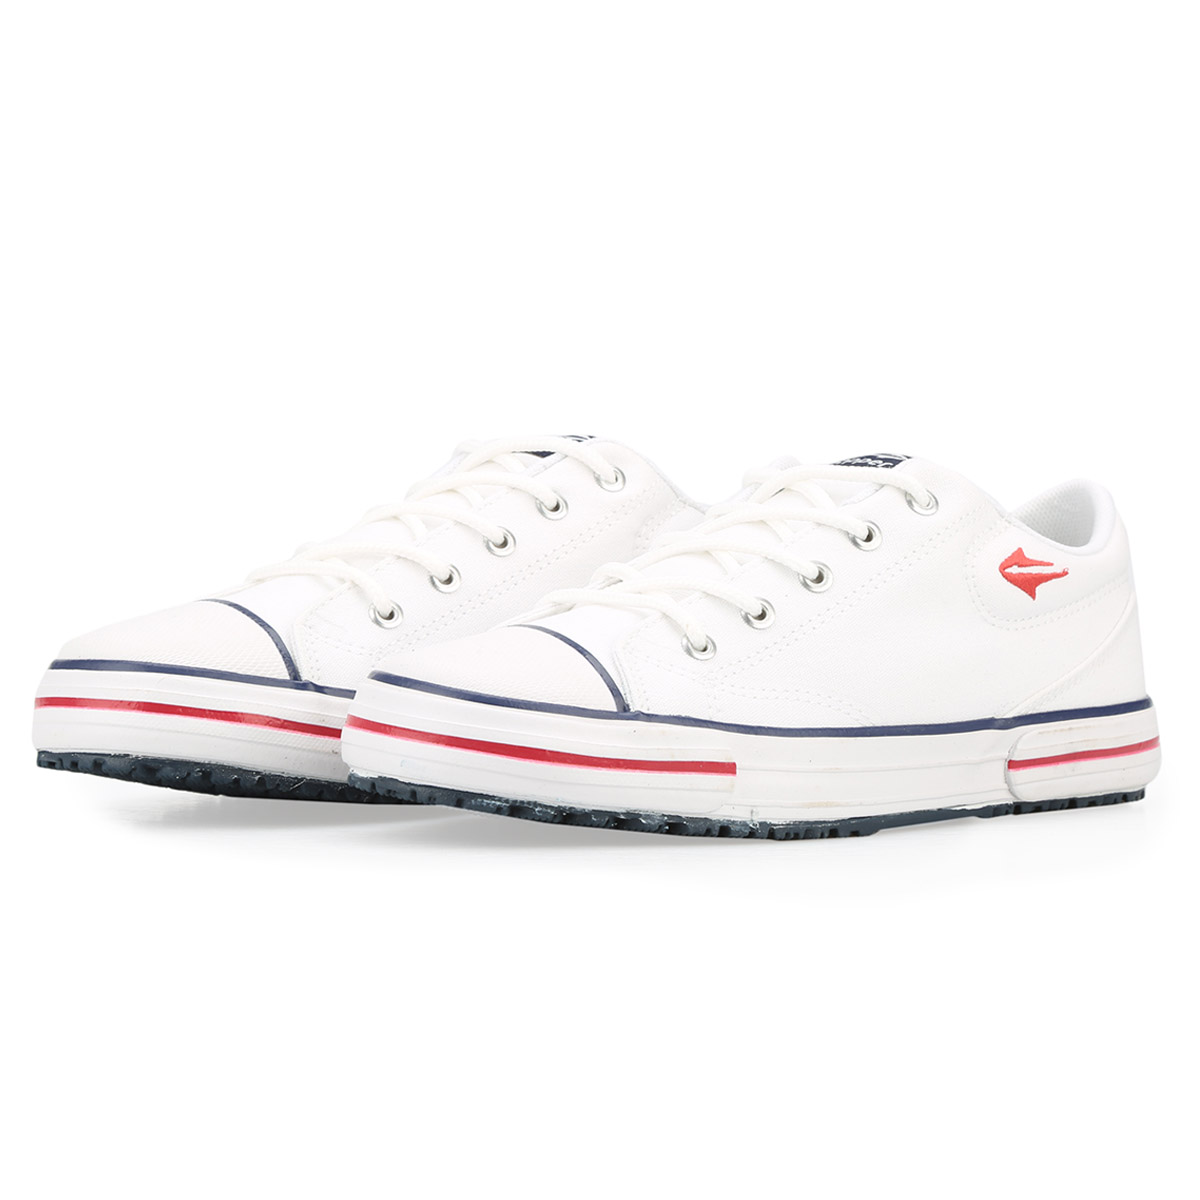 Zapatillas Topper Nova Low,  image number null